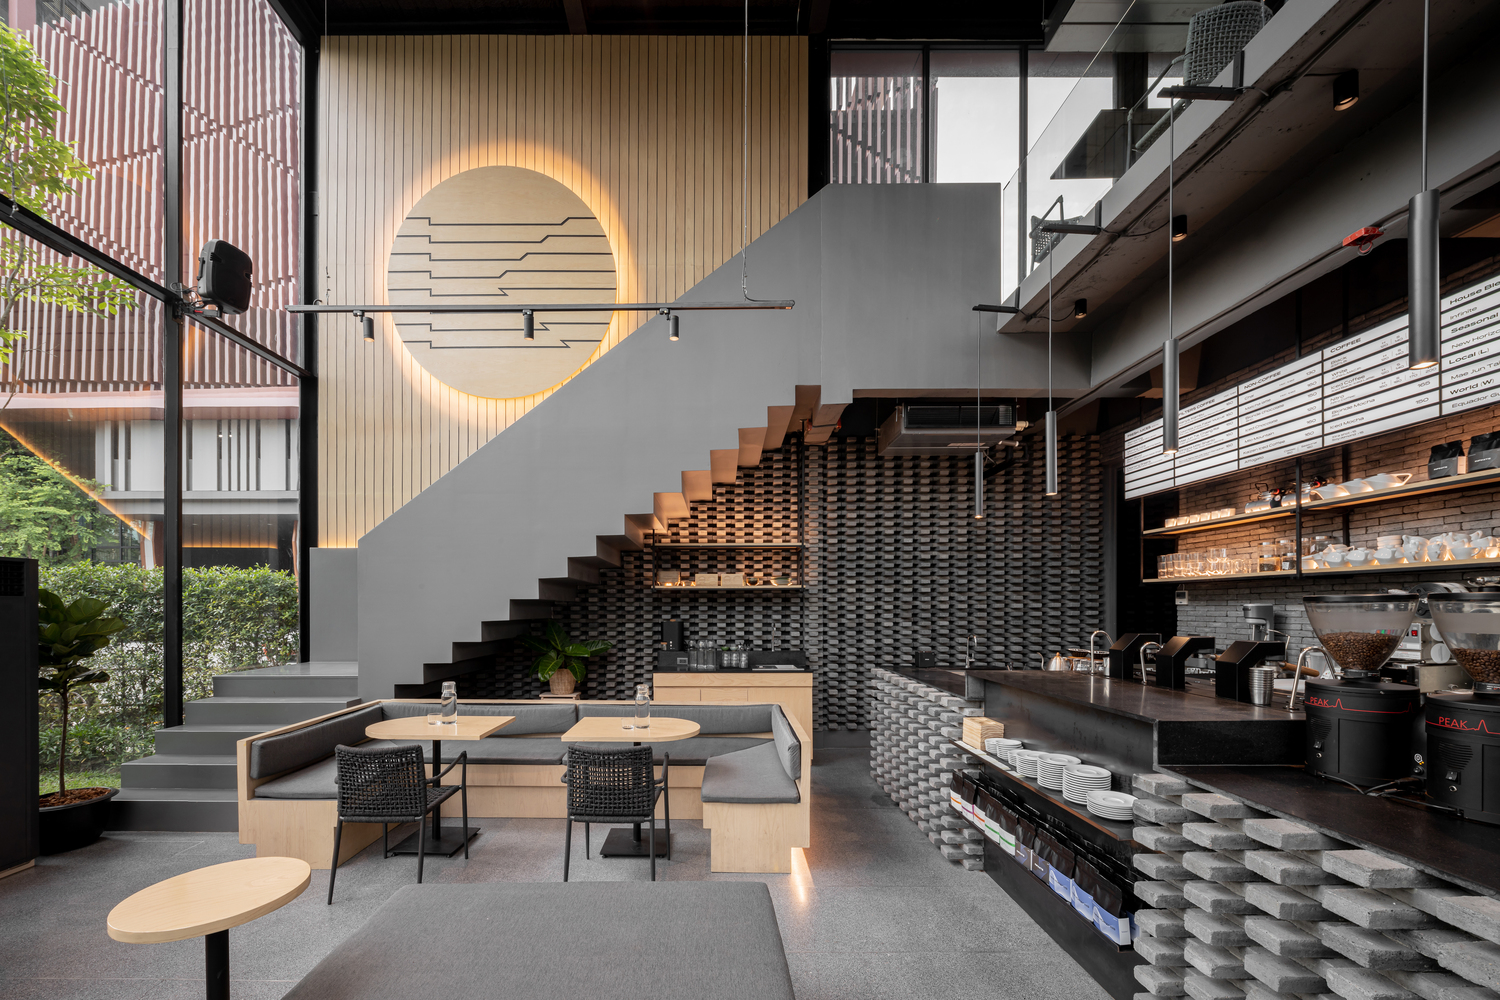 https://www.arch2o.com/wp-content/uploads/2022/12/Arch2O-why-did-these-20-modern-coffee-shops-designs-cause-such-a-stir-3.jpg